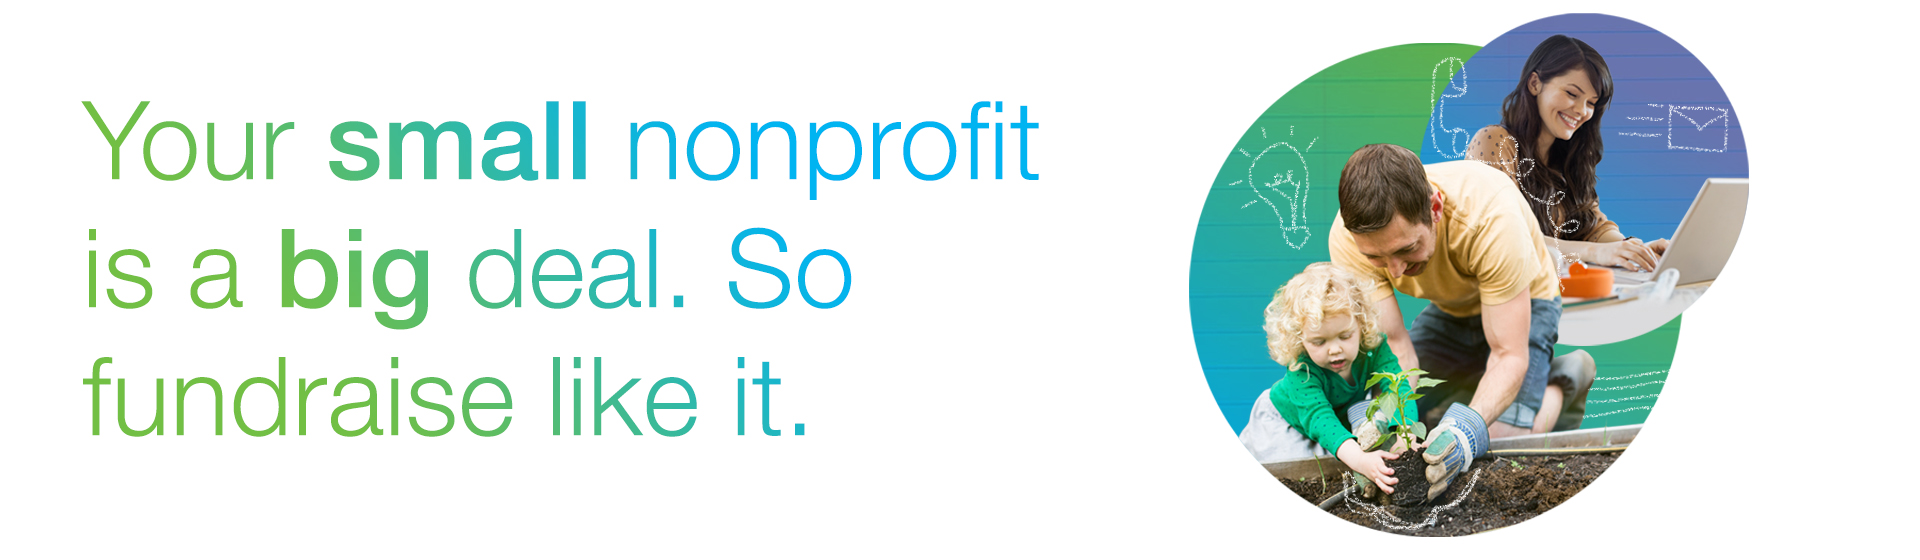 Your small nonprofit is a big deal. So fundraise like it.